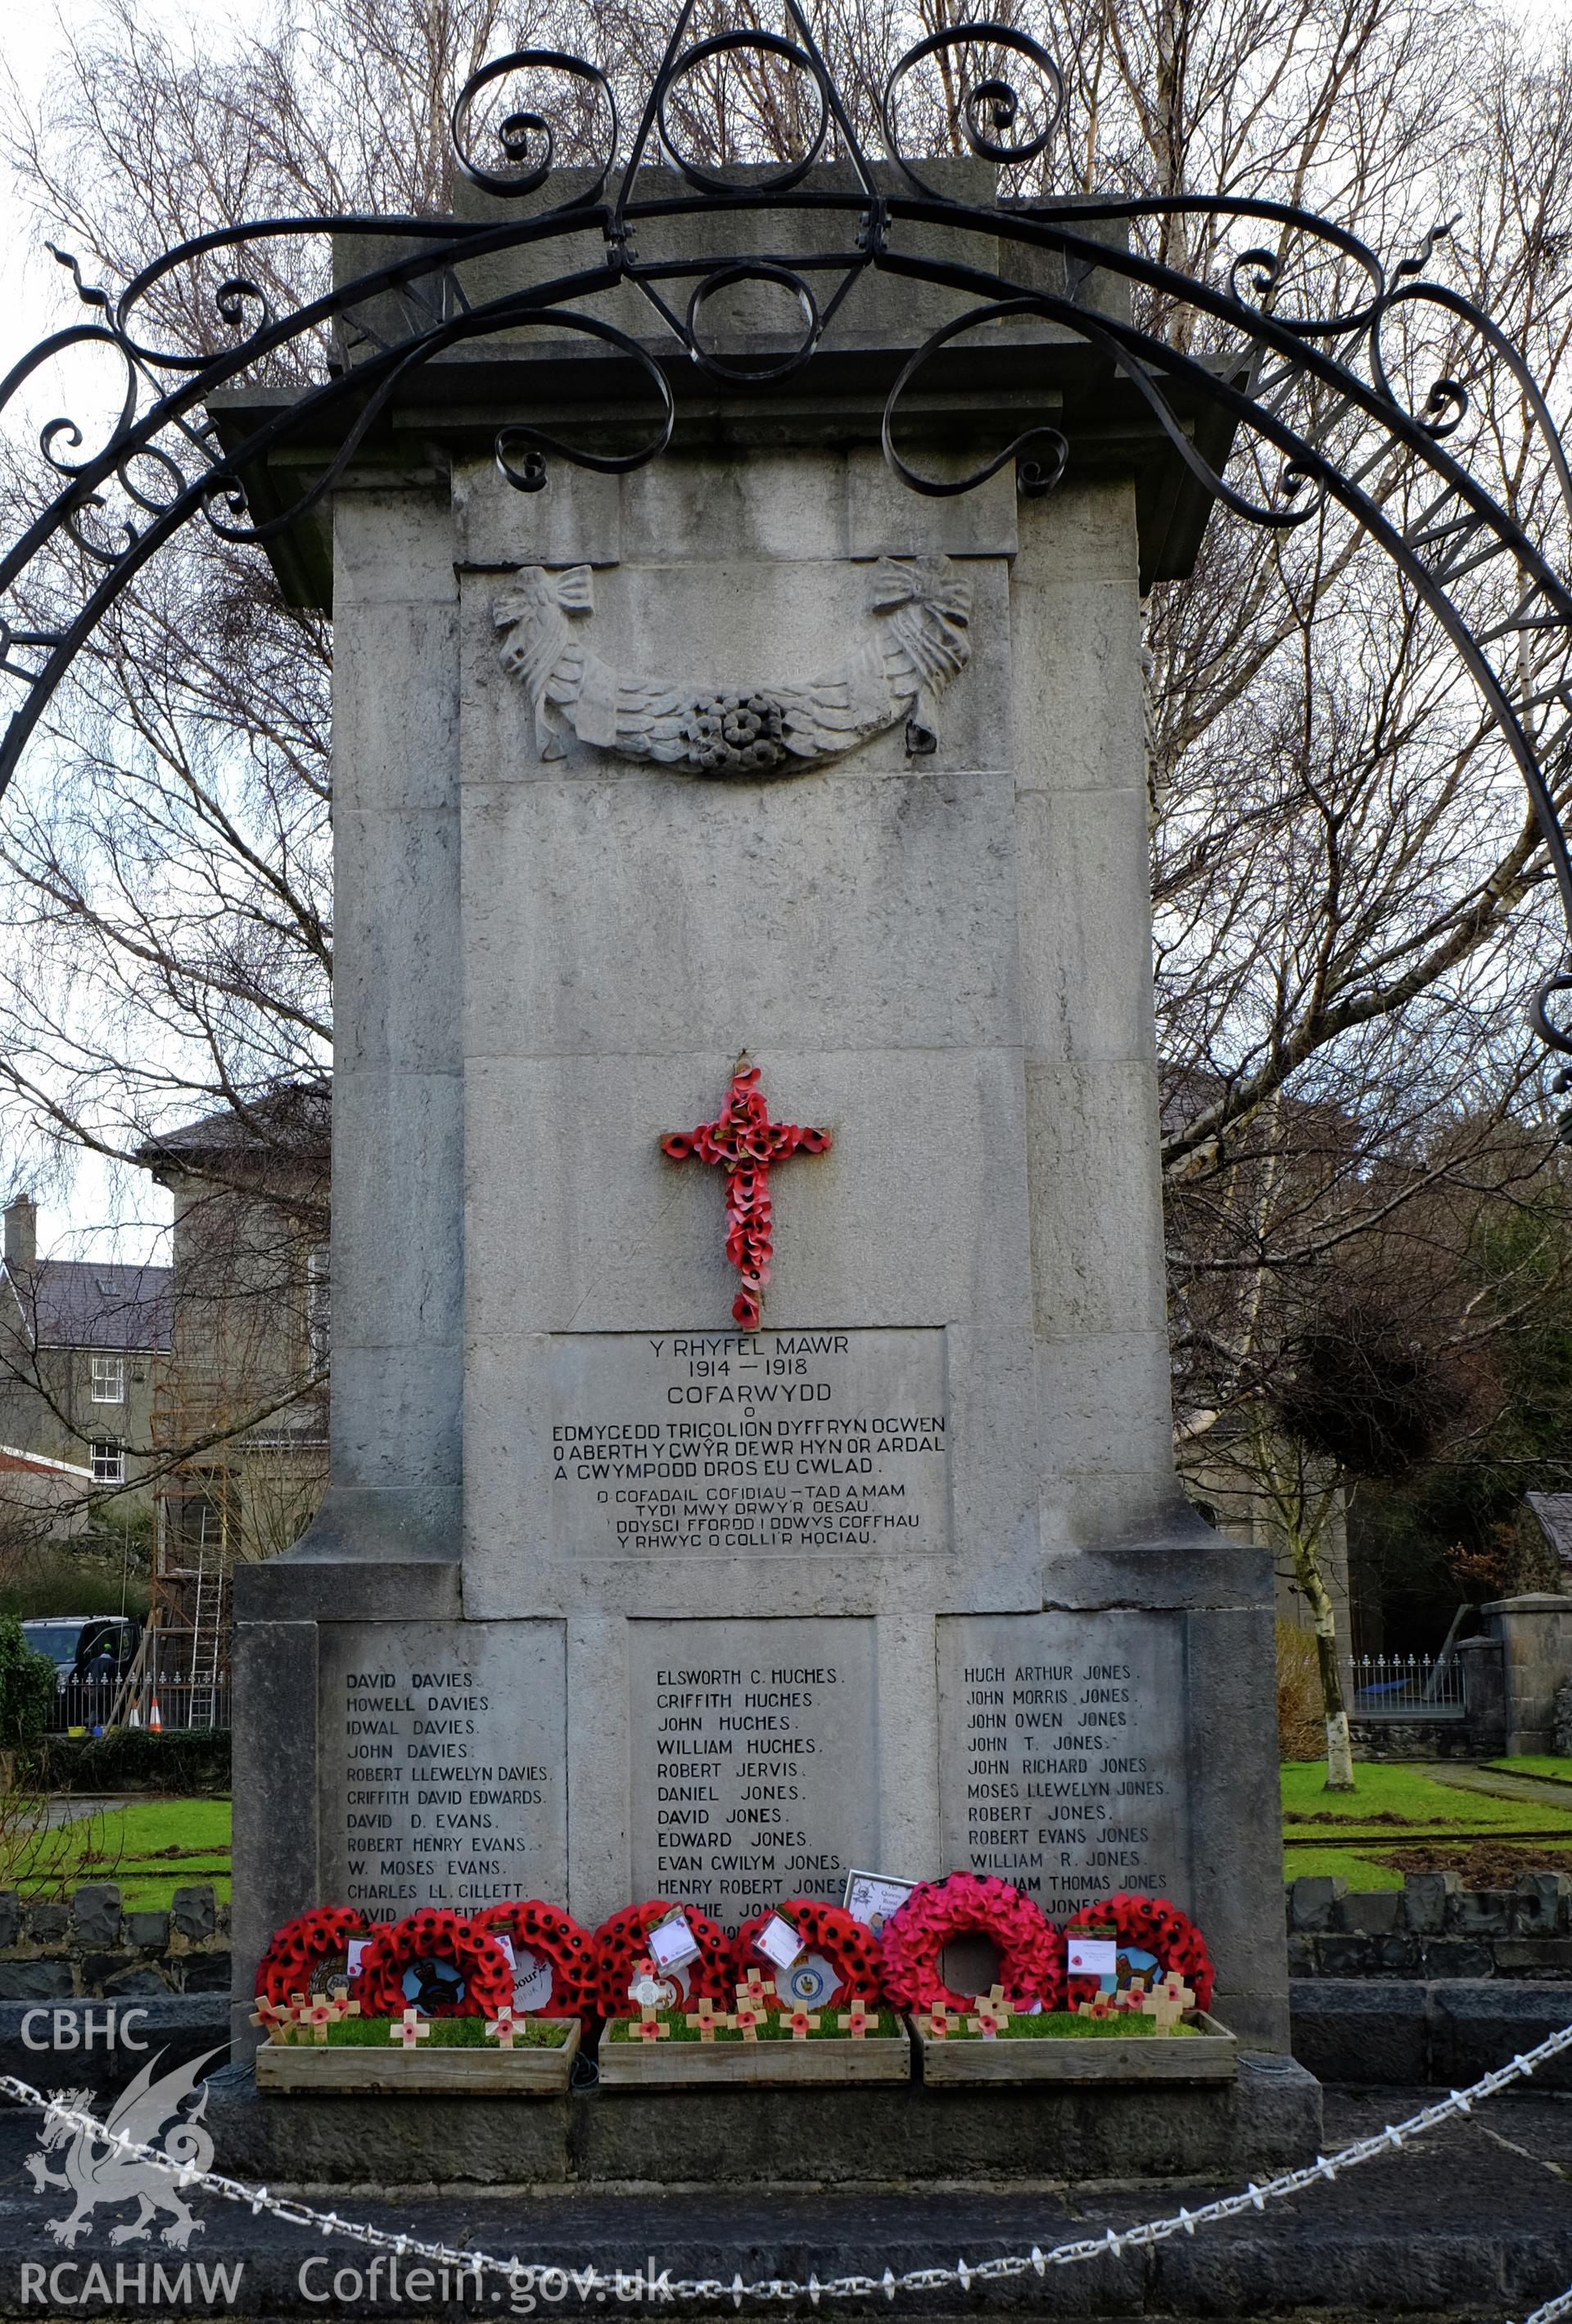 Colour photograph showing a view of Bethesda War Memorial, looking north from the high street, produced by Richard Hayman 16th February 2017